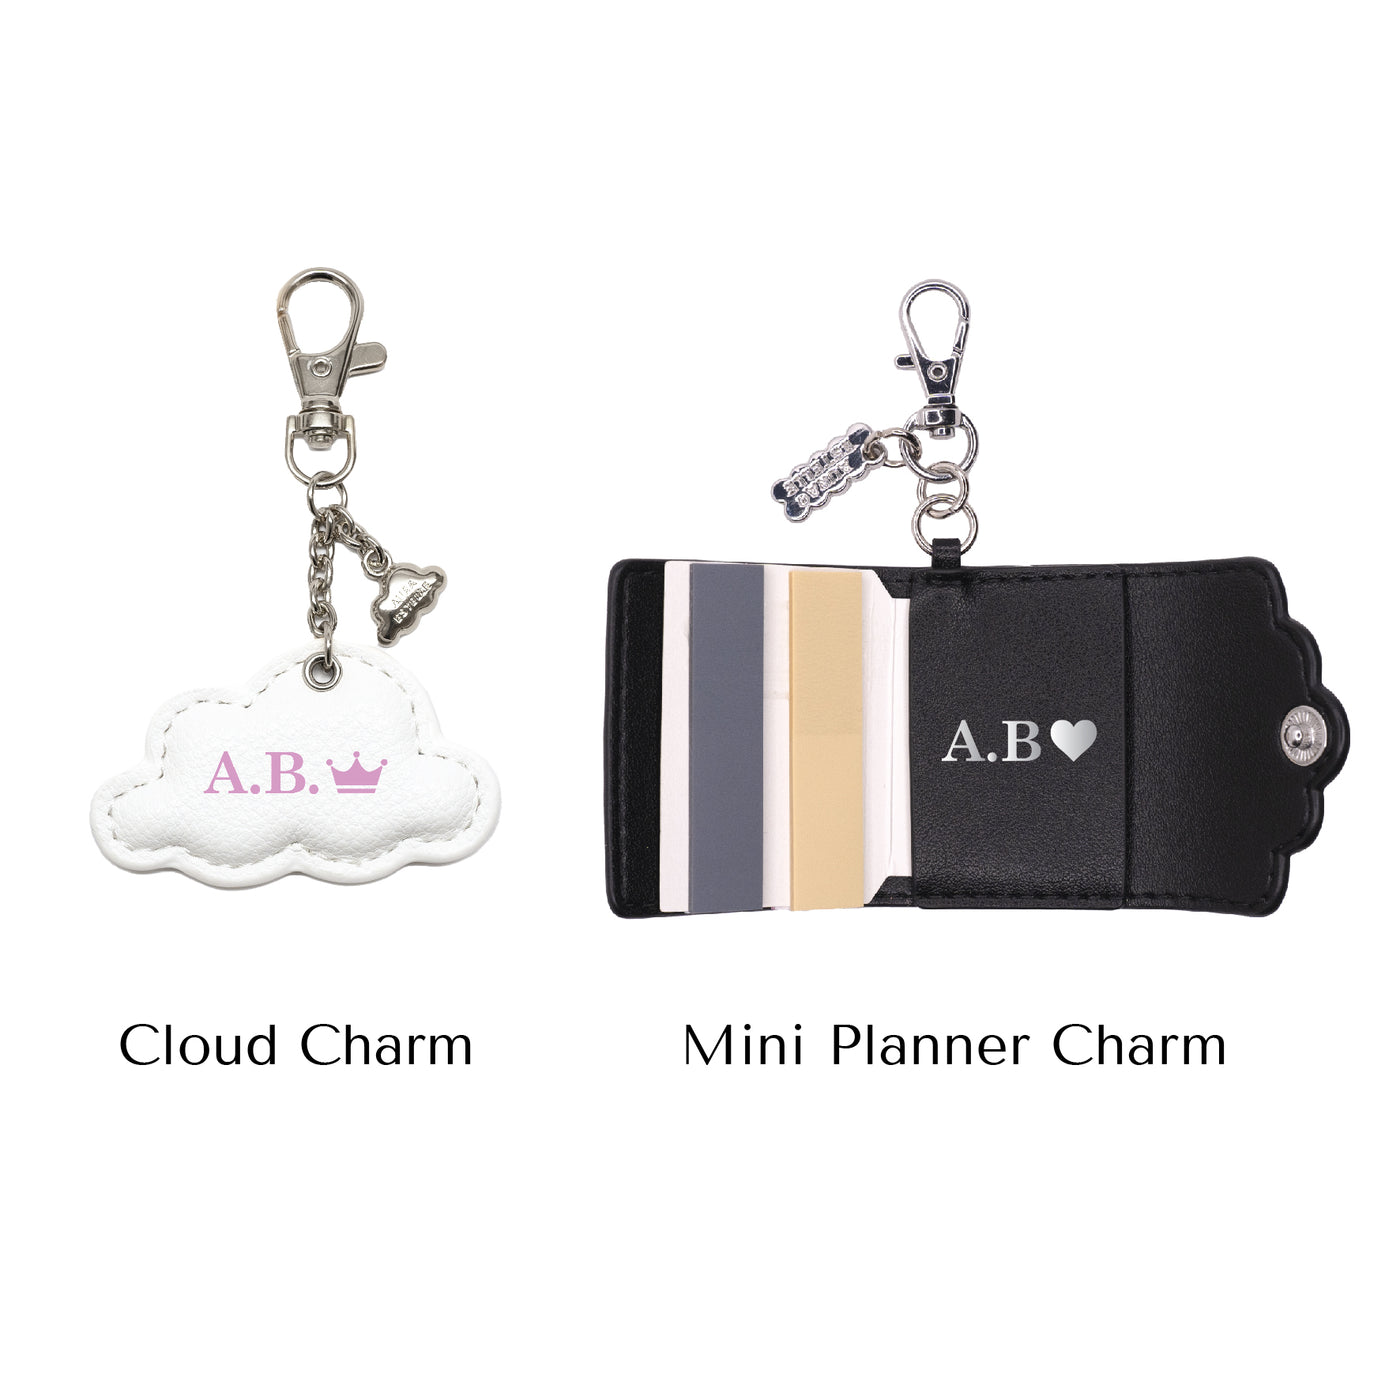 PERSONALIZATION SERVICE FOR CHARMS & CLIPS